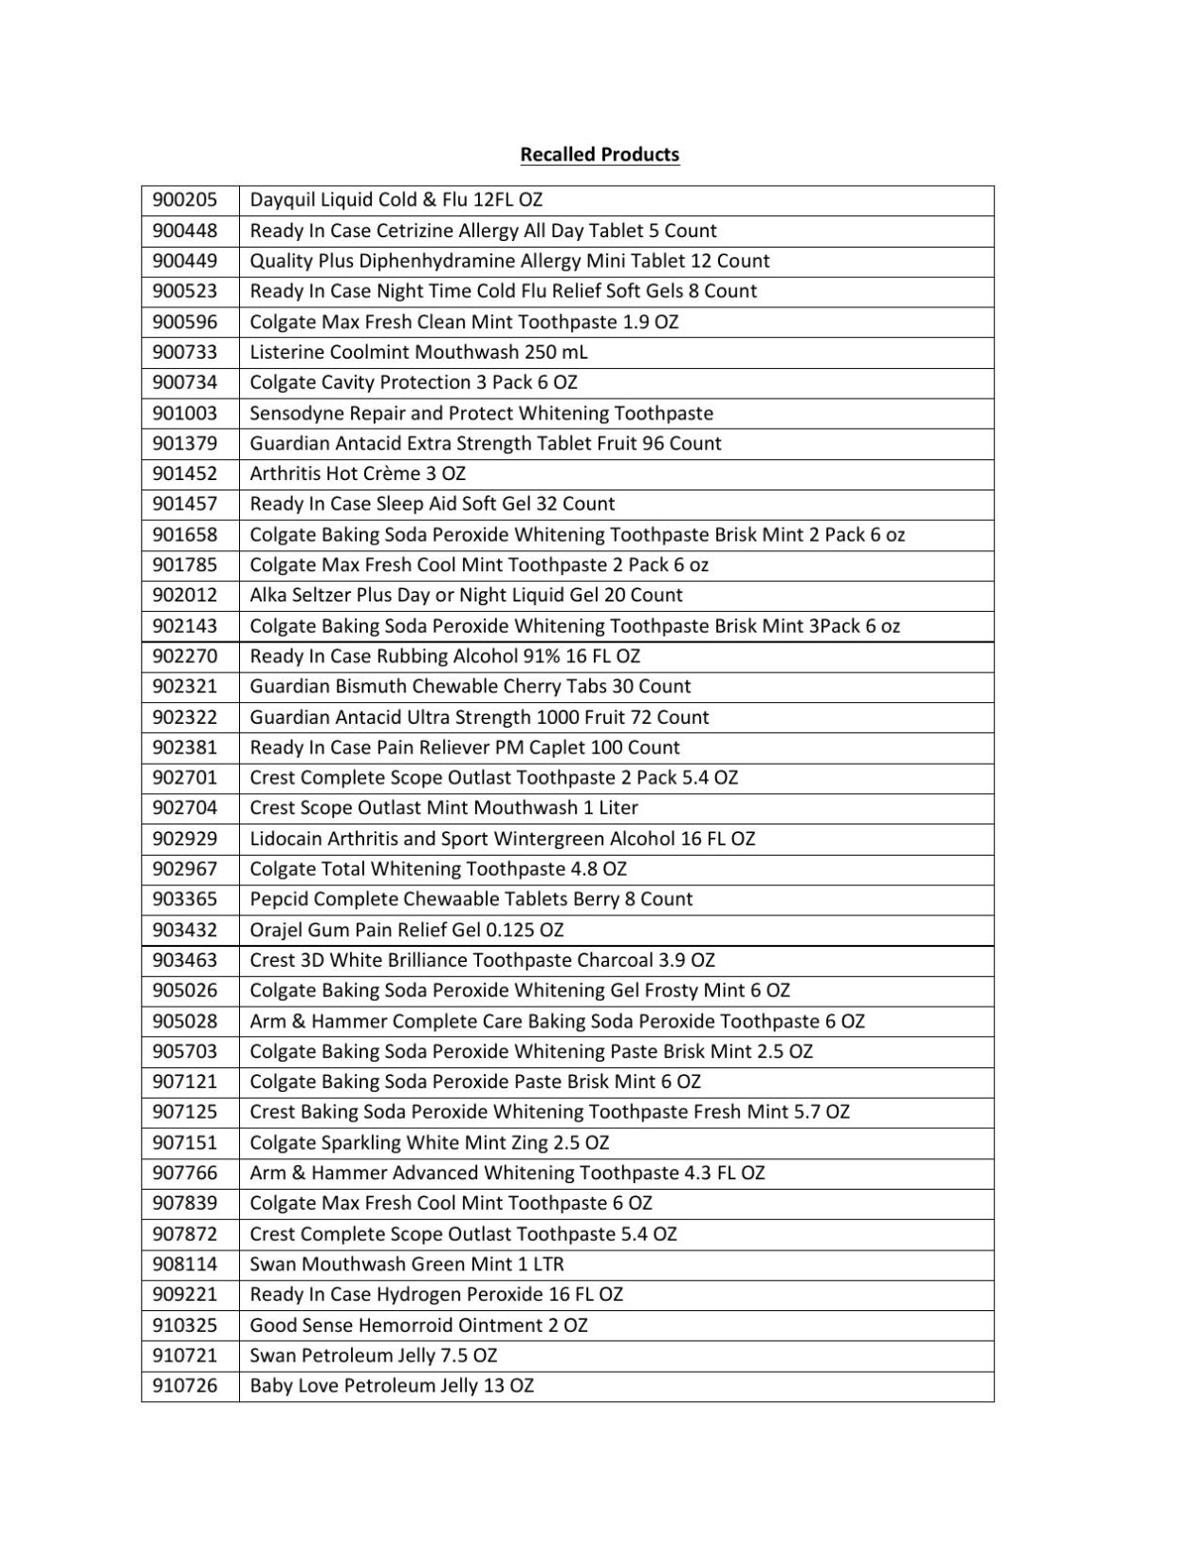 FDA list of recalled products from Family Dollar 7-21-22